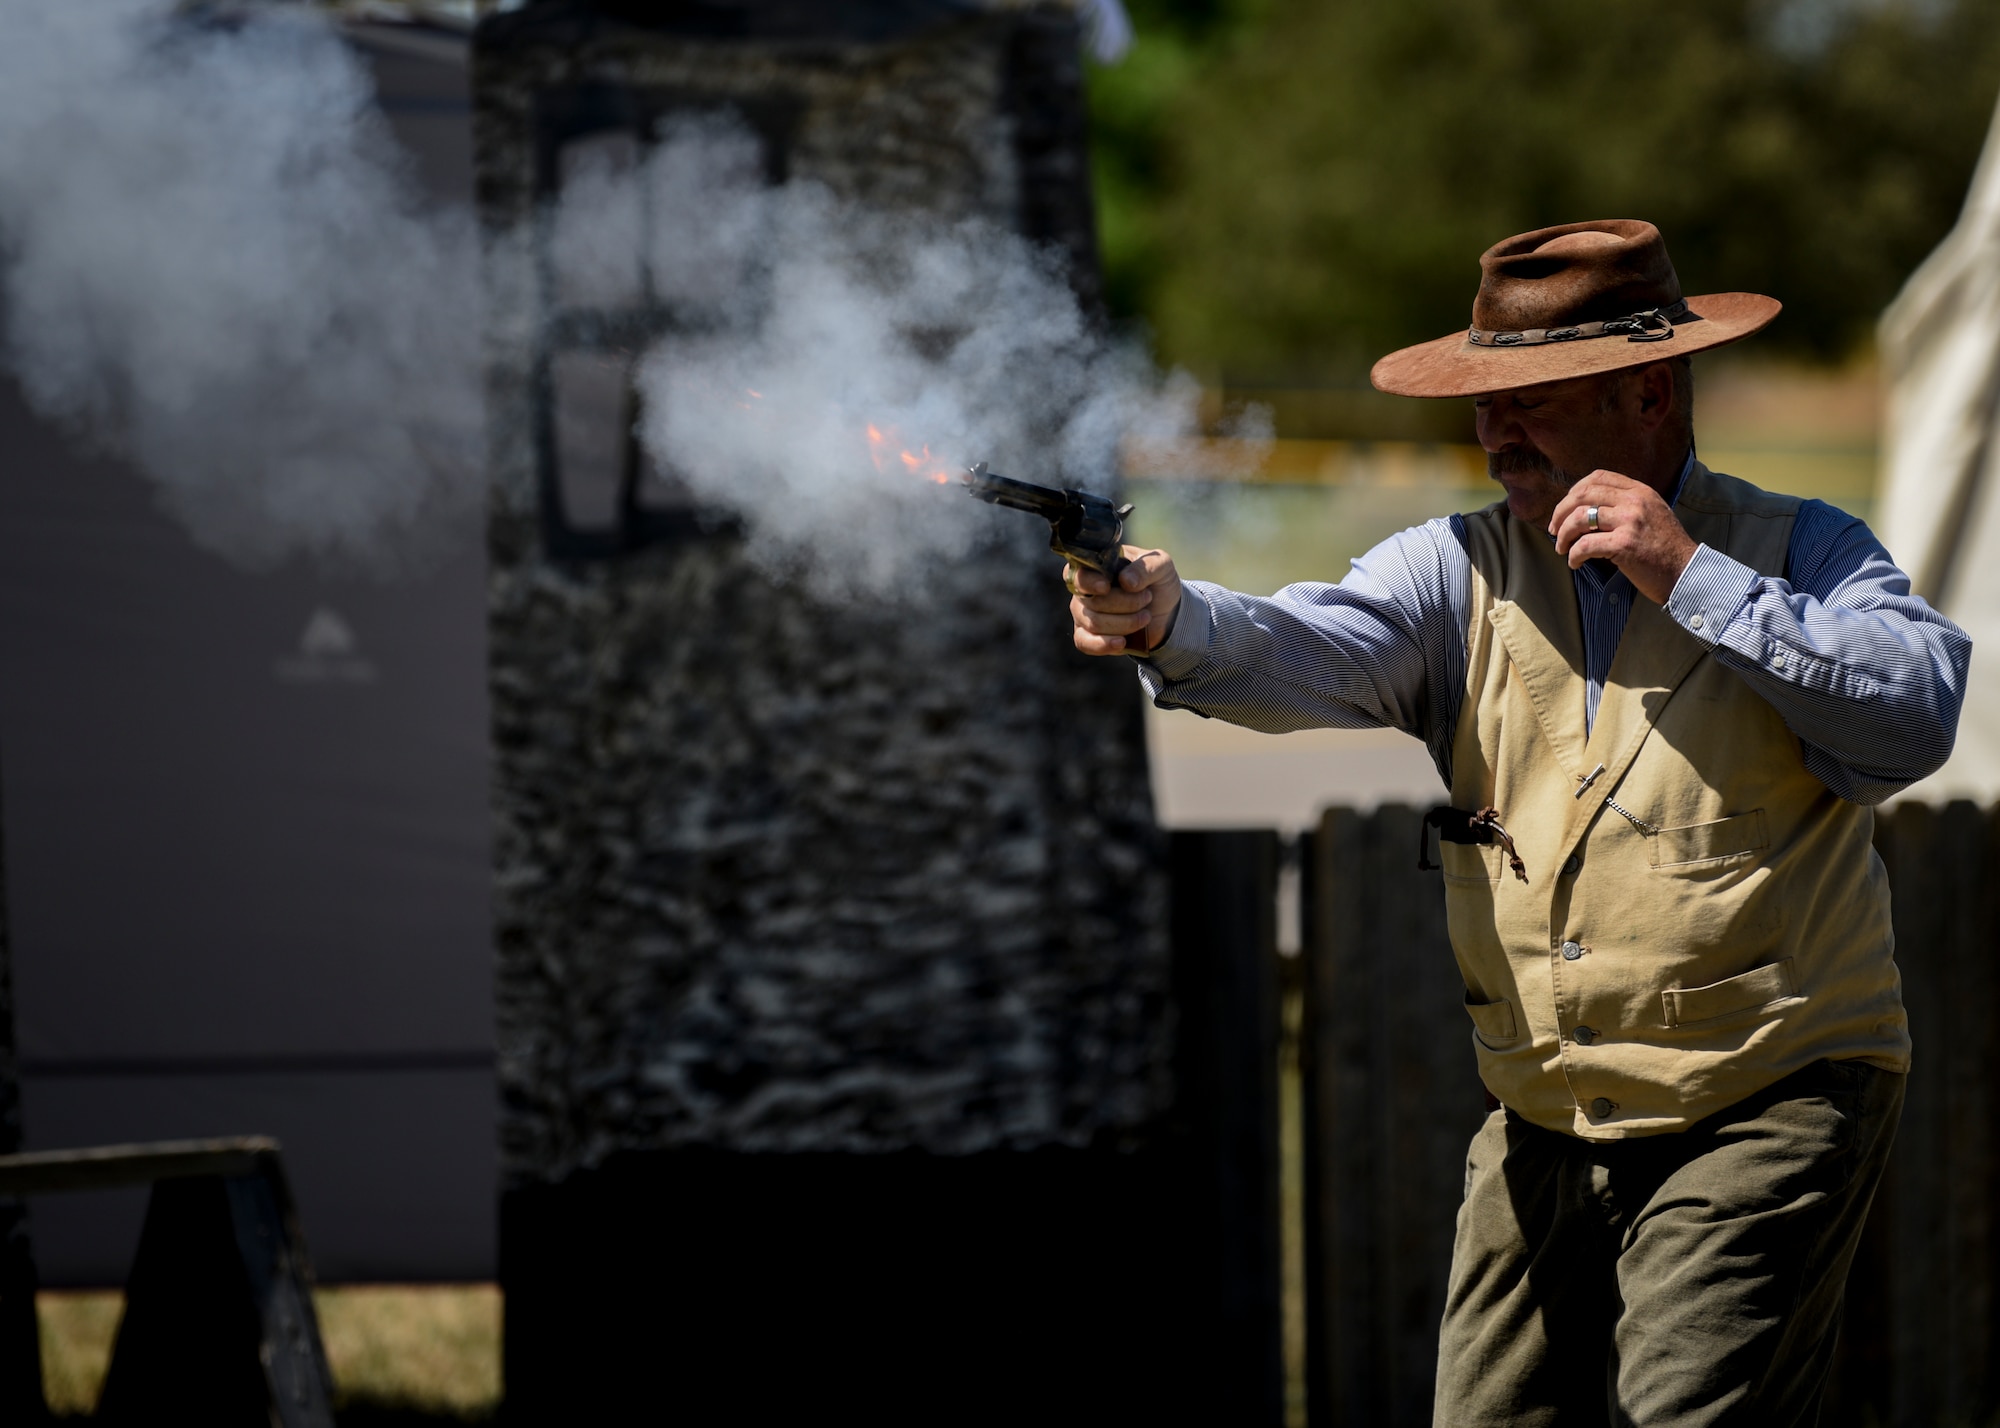 A Wyoming Widow Maker gunslinger performs at Fort D.A. Russell Days, July 19, 2019, at F.E. Warren Air Force Base, Wyo. The Wyoming Widow Makers come from Laramie, Wyo., and demonstrate gun safety, as well as, an old western shootouts. (U.S. Air Force photo by Staff Sgt. Ashley N. Sokolov)